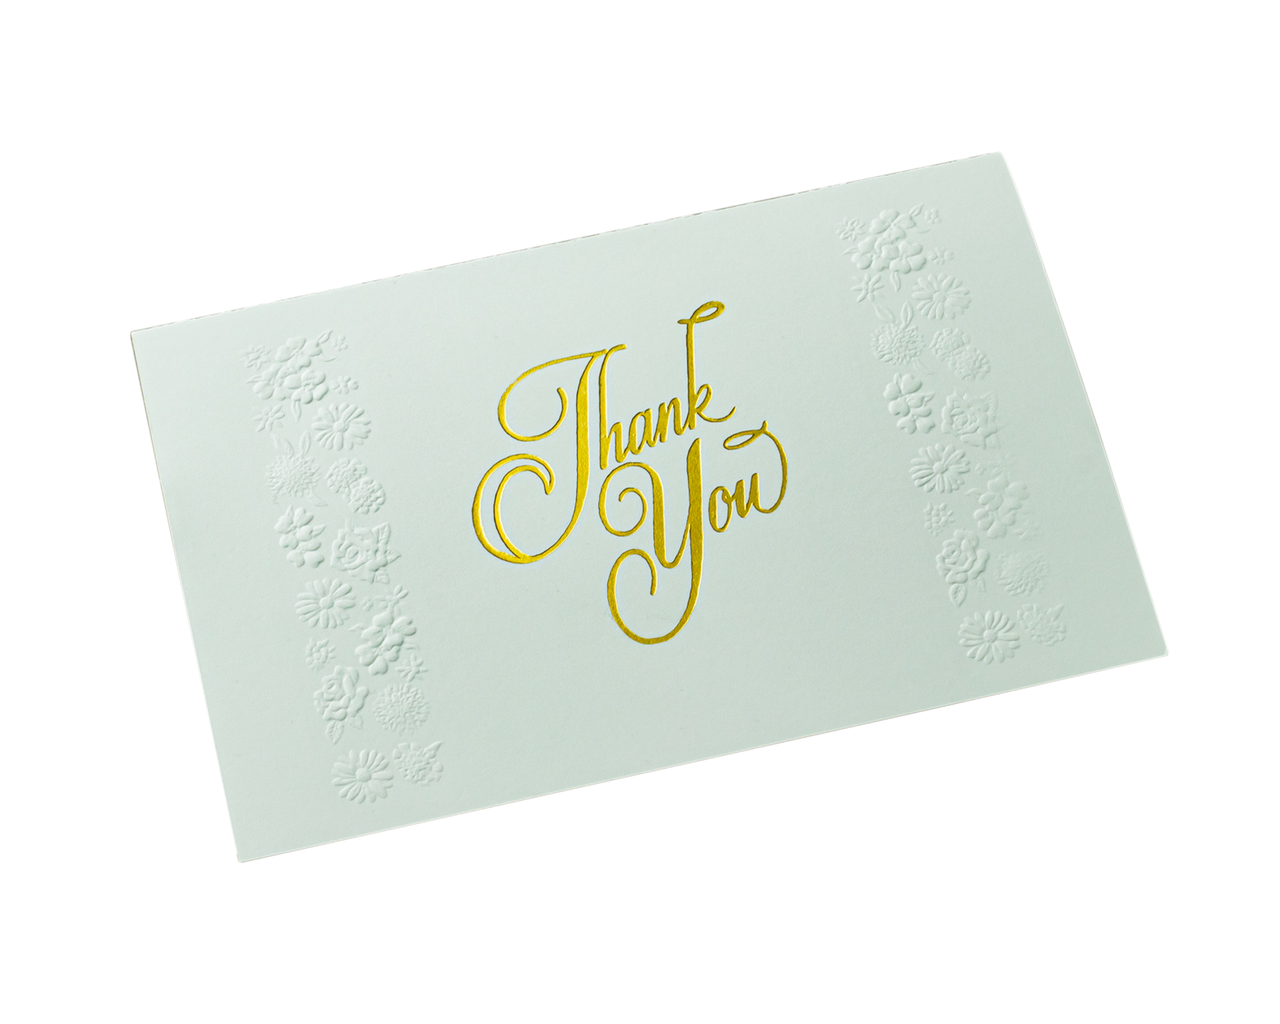 Gold Foil Stamped "Thank You" with Embossed Design